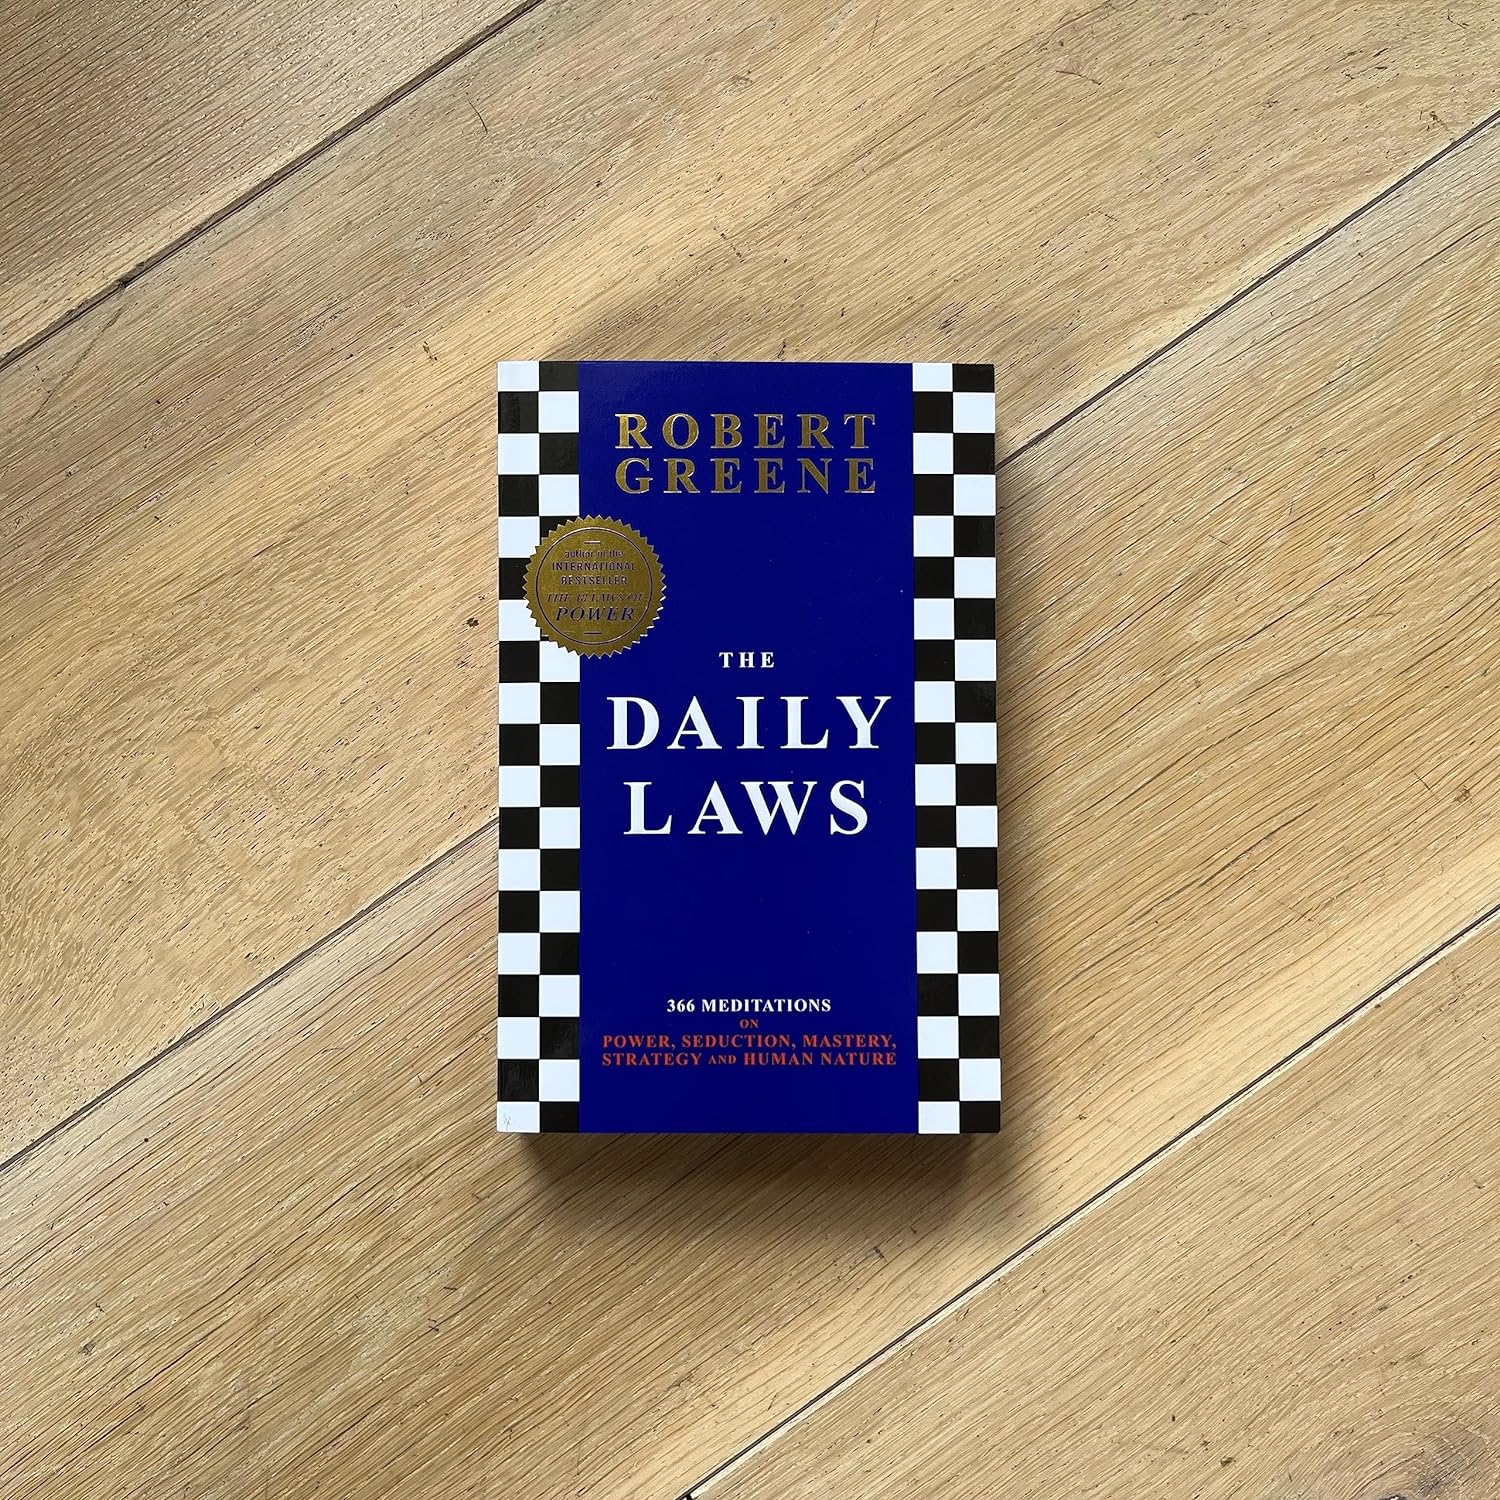 The Daily Laws: 366 Meditations on Power, Seduction, Mastery, Strategy and Human Nature - The English Bookshop